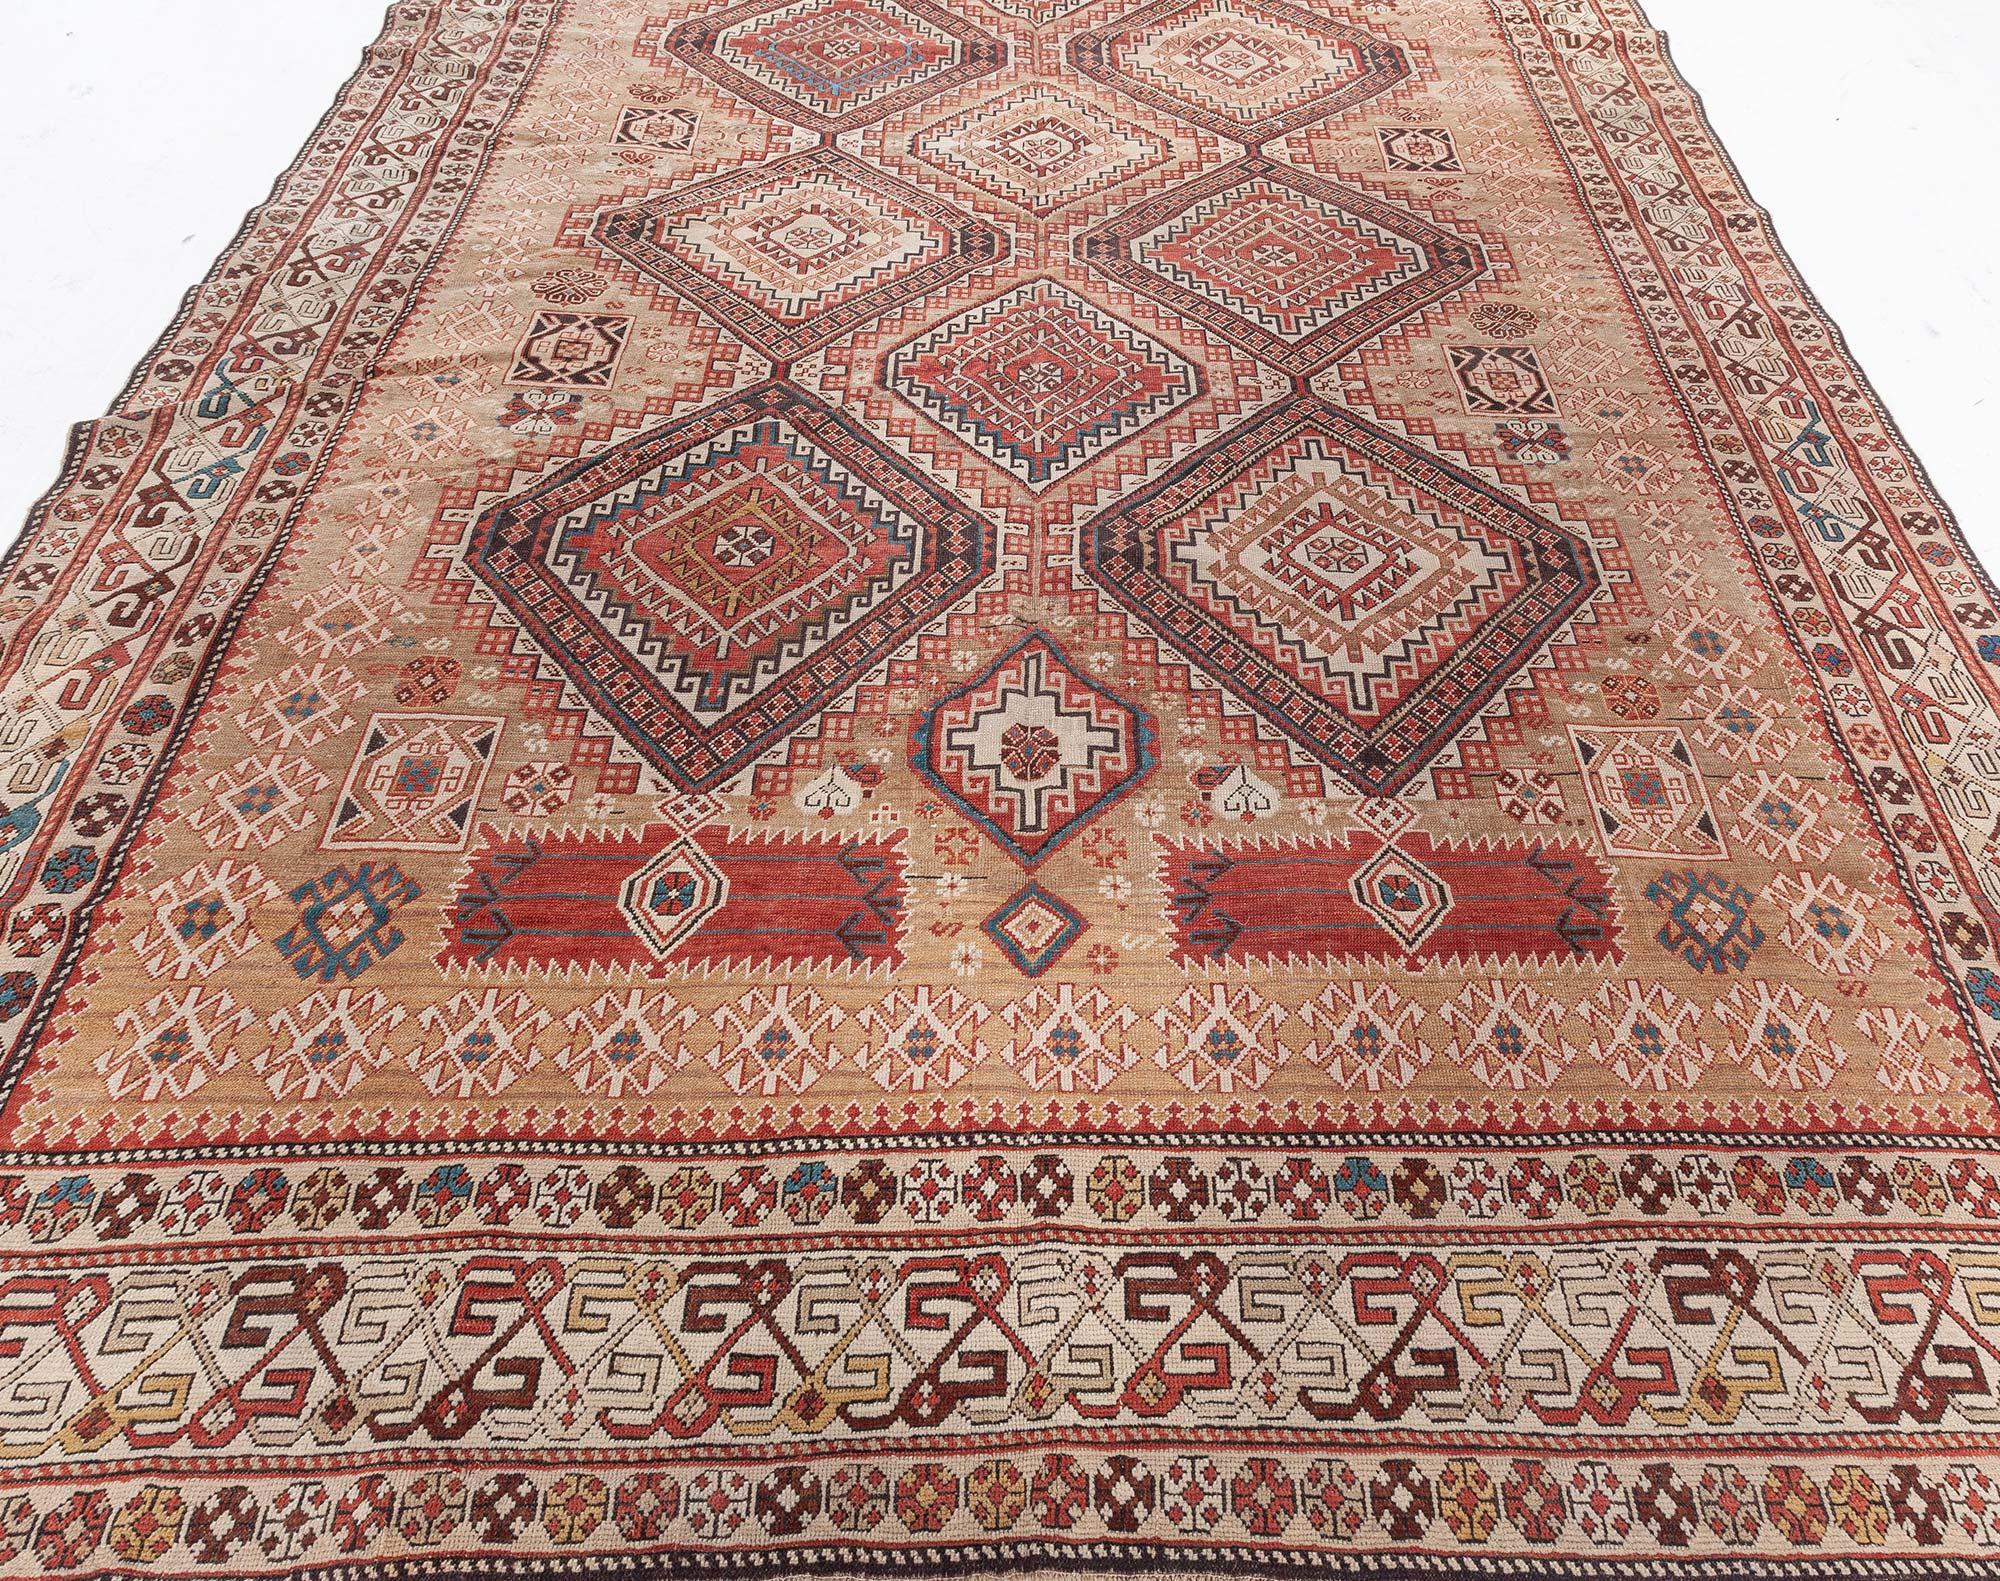 One-of-a-kind 19th century Caucasian Shirvan handmade wool rug
An antique Persian Shirvan rug, late 19th century. A grid of interconnected diamond shapes layered with class design motifs including Greek key and cruciform shapes. Brown, coral,